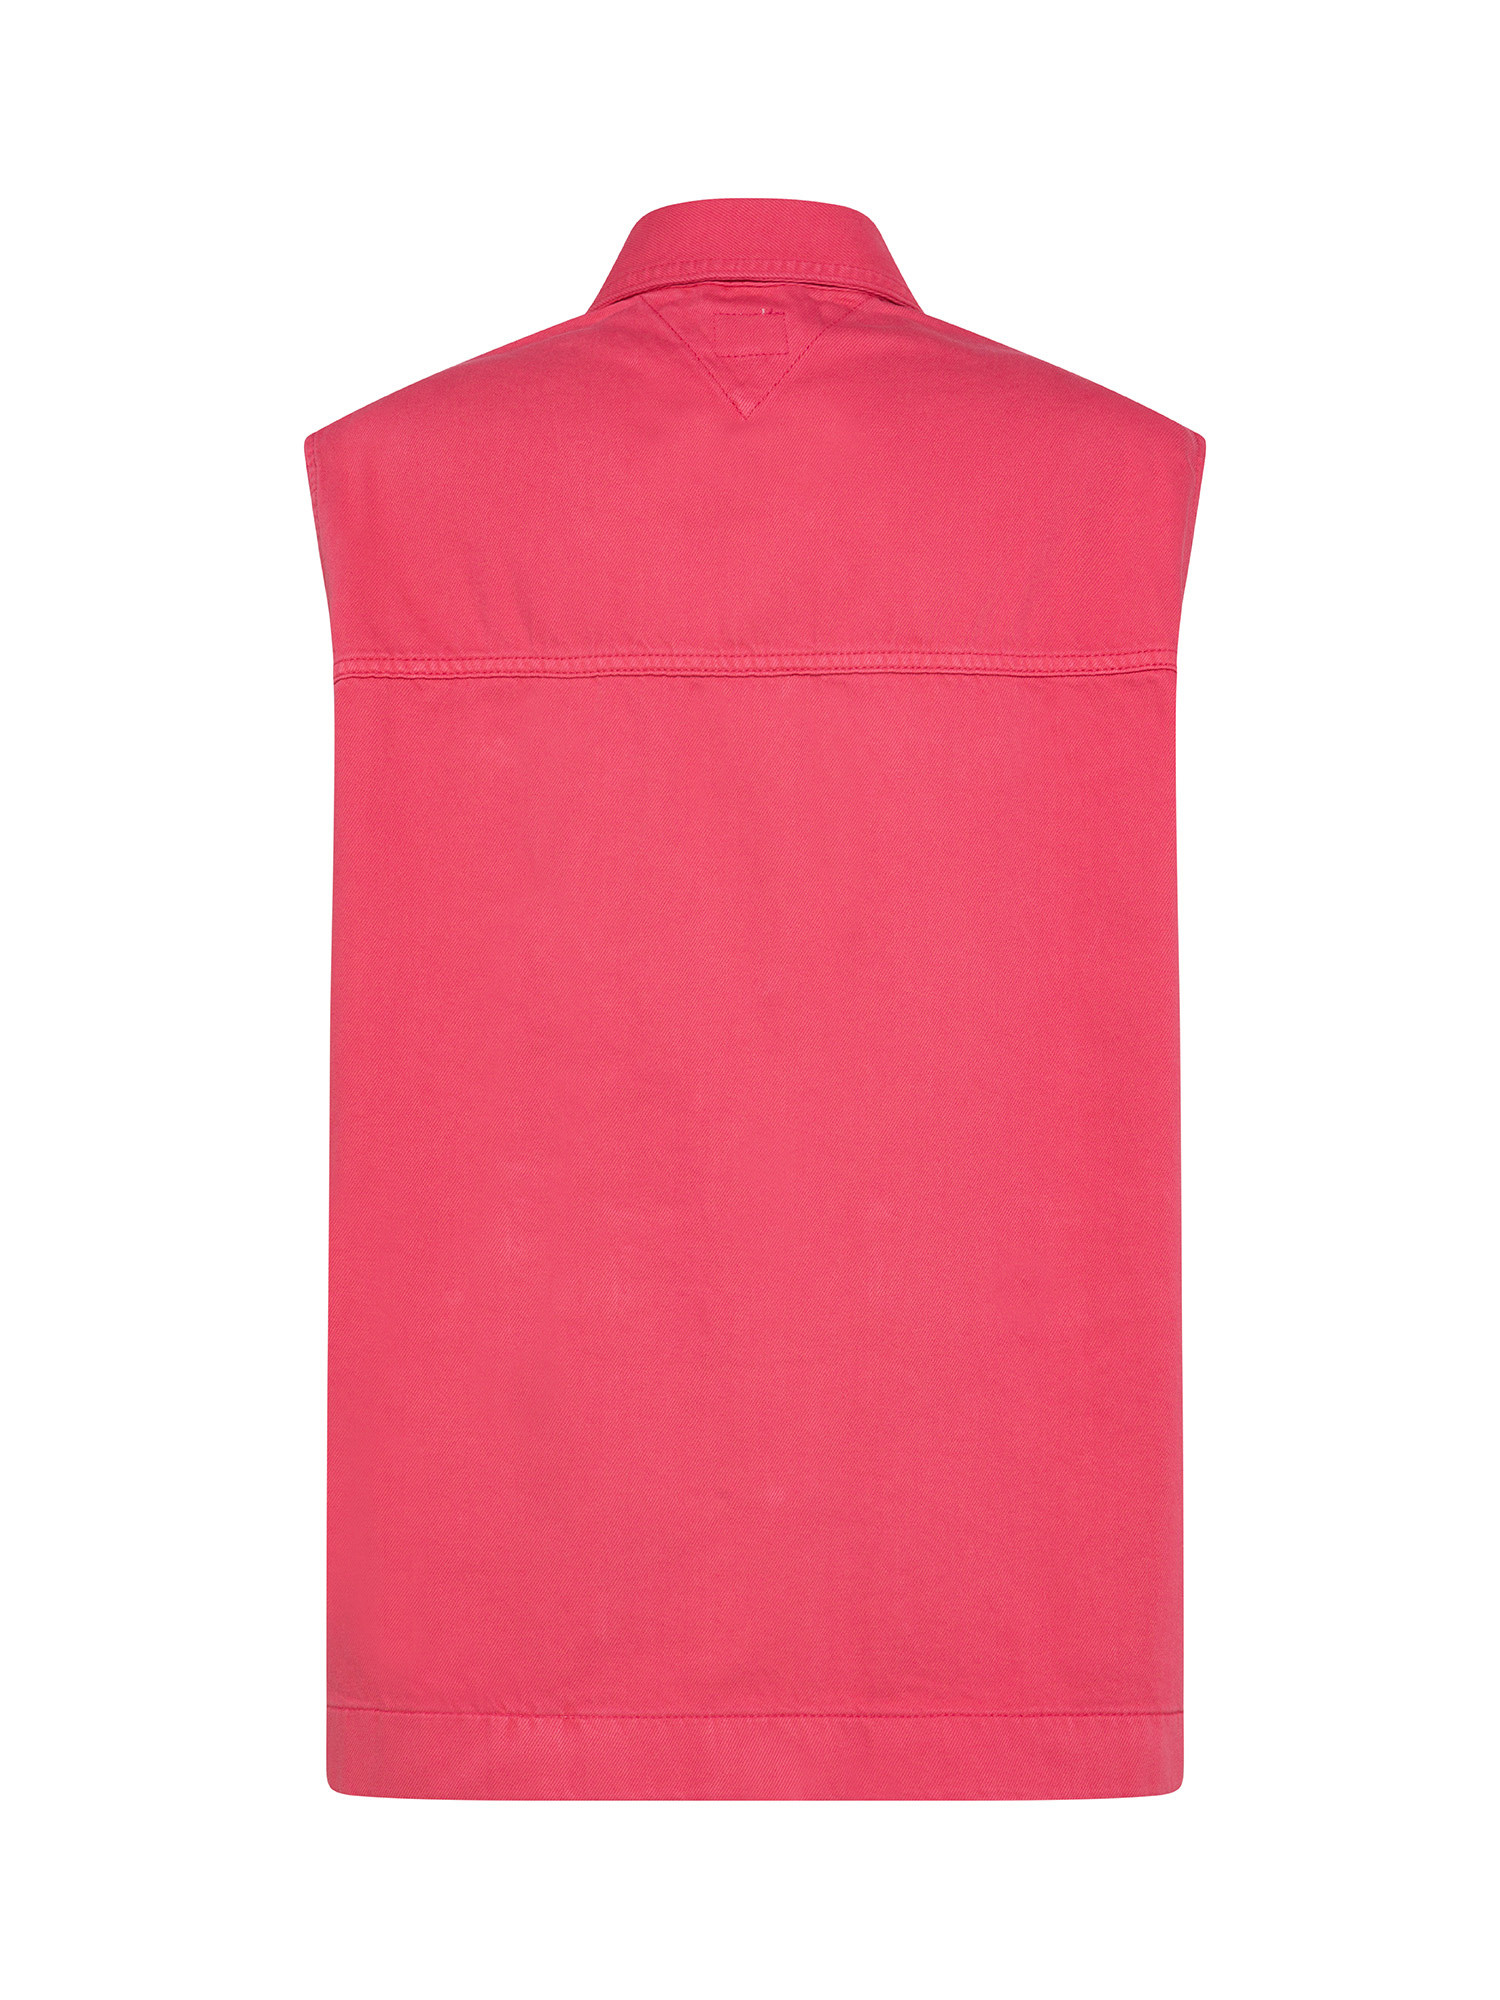 Tommy Jeans - Gilet in denim colorato, Rosa fuxia, large image number 1